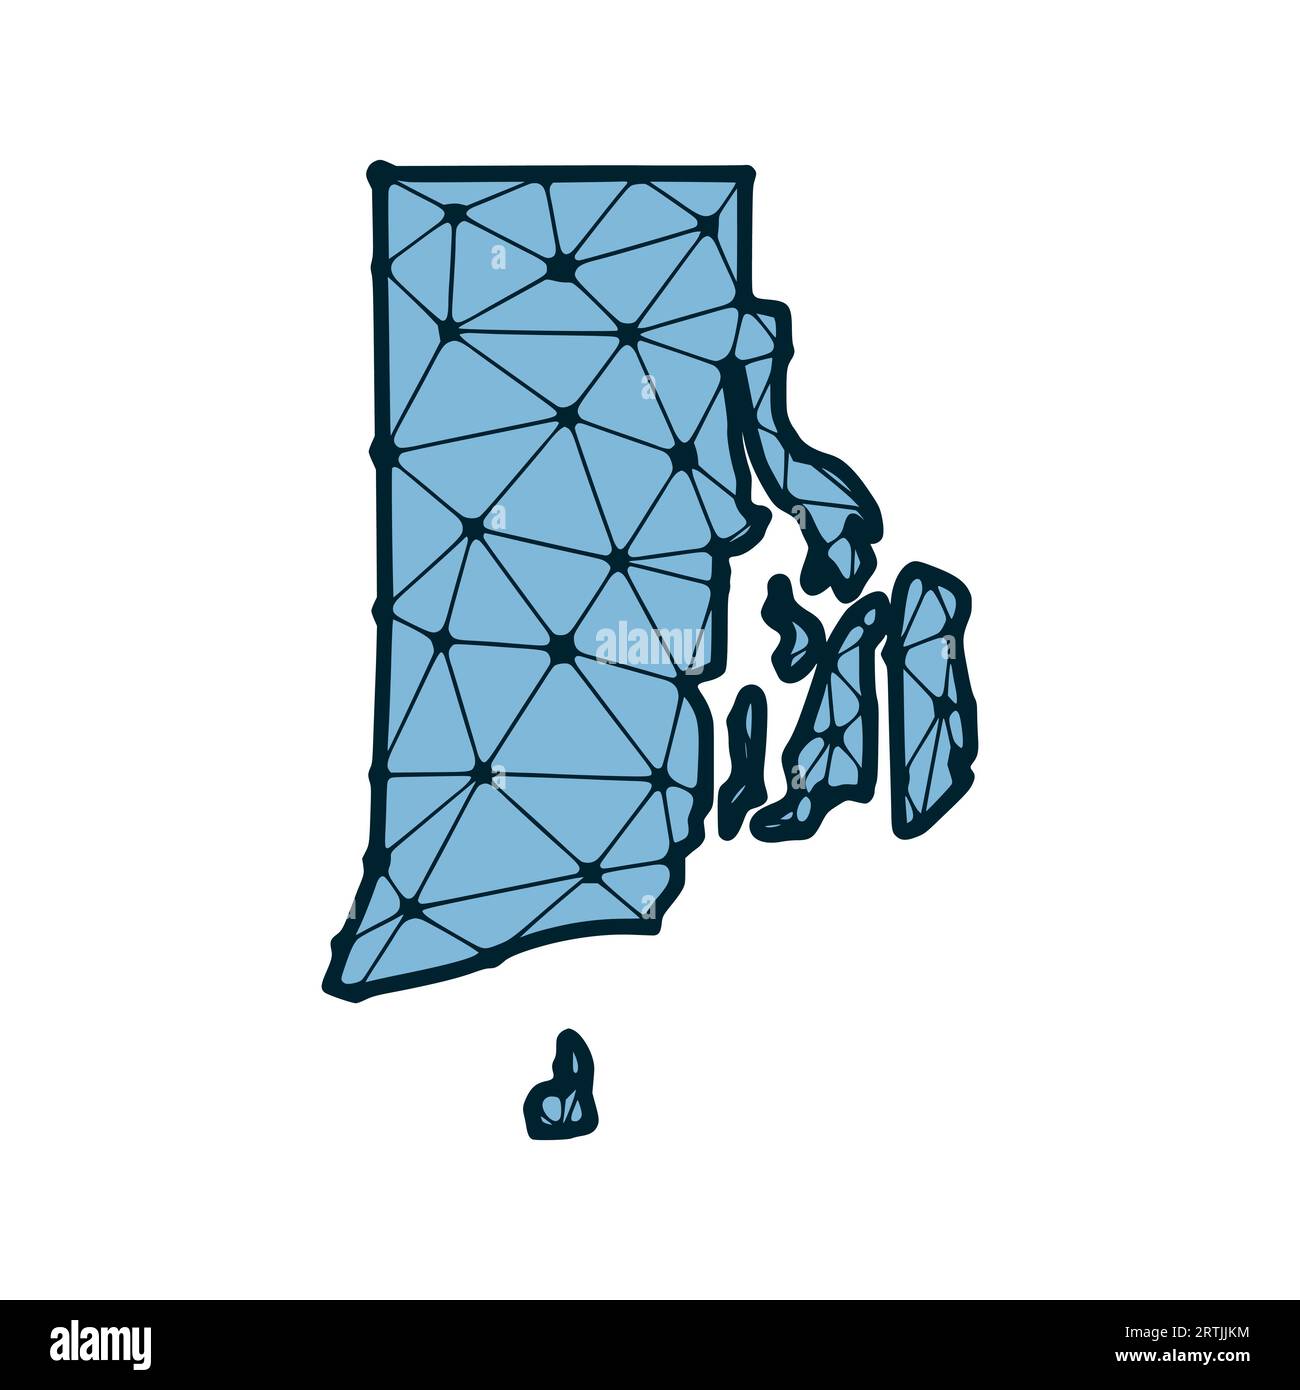 Rhode Island state map polygonal illustration made of lines and dots, isolated on white background. US state low poly design Stock Vector